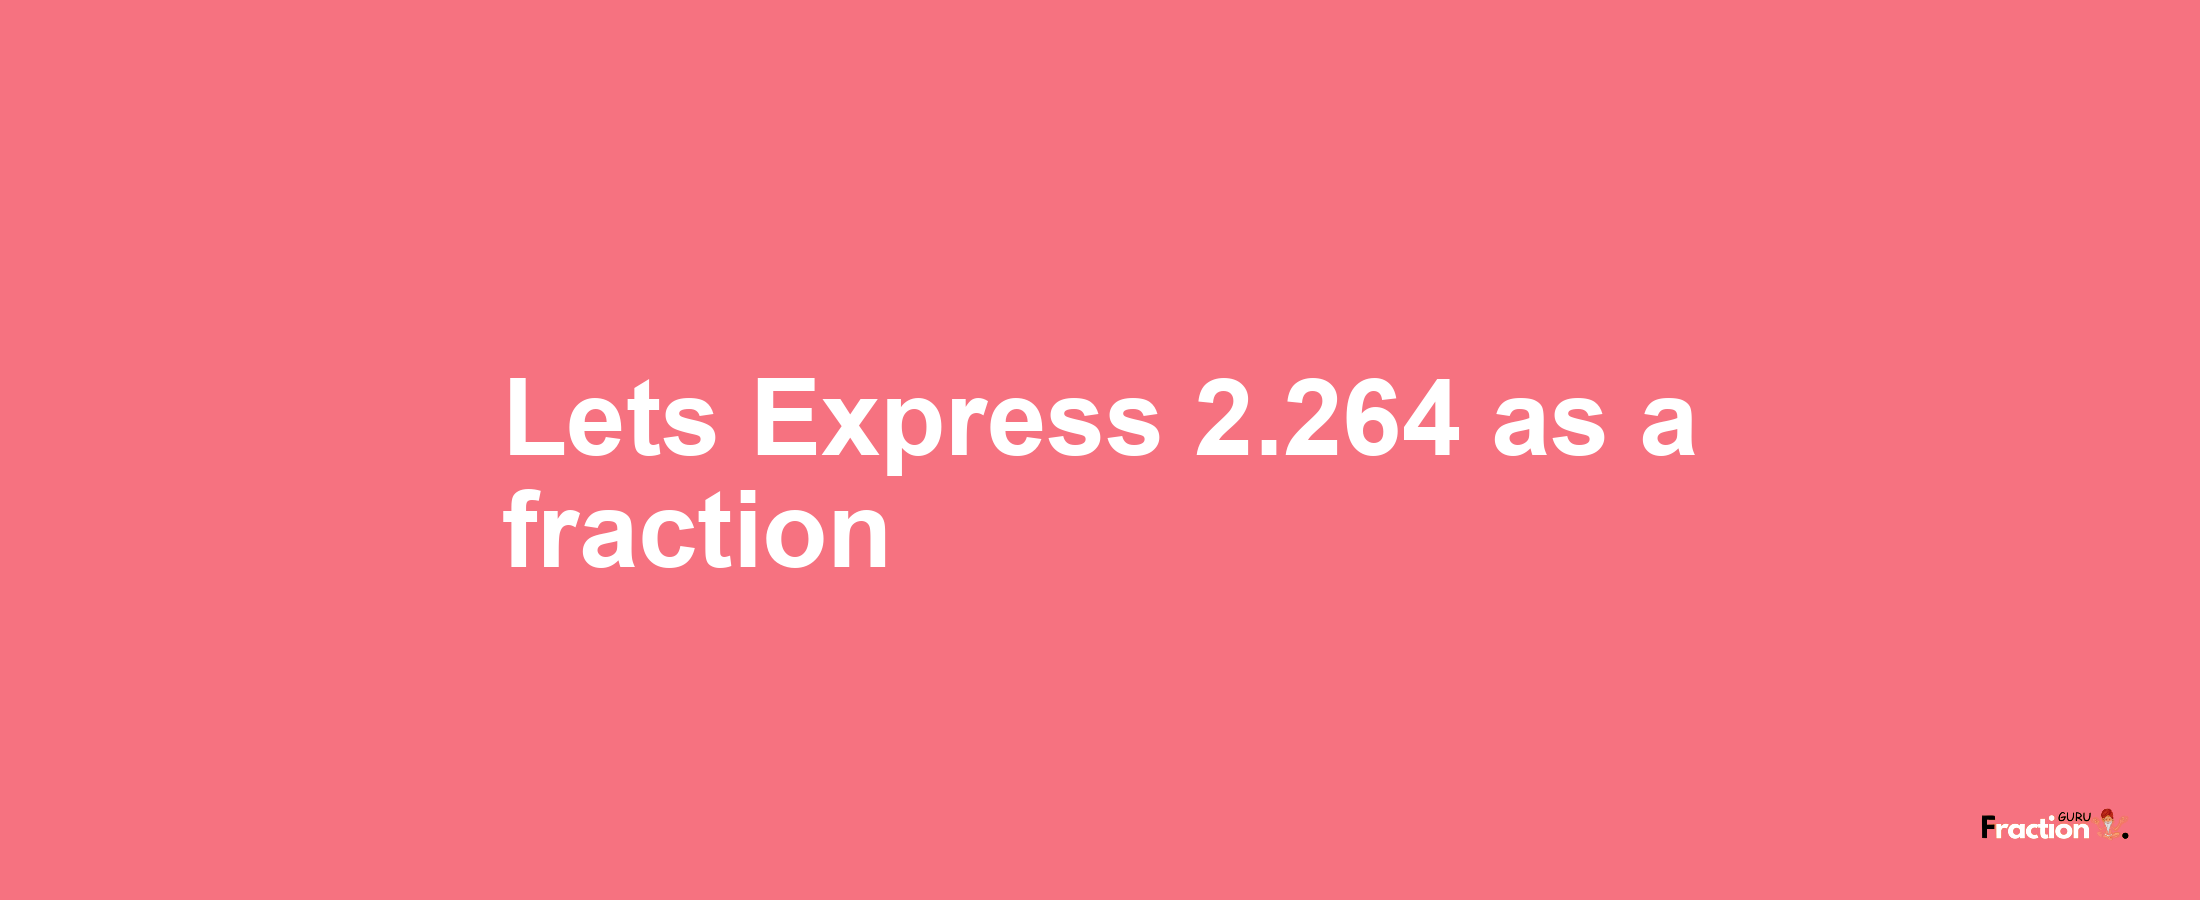 Lets Express 2.264 as afraction